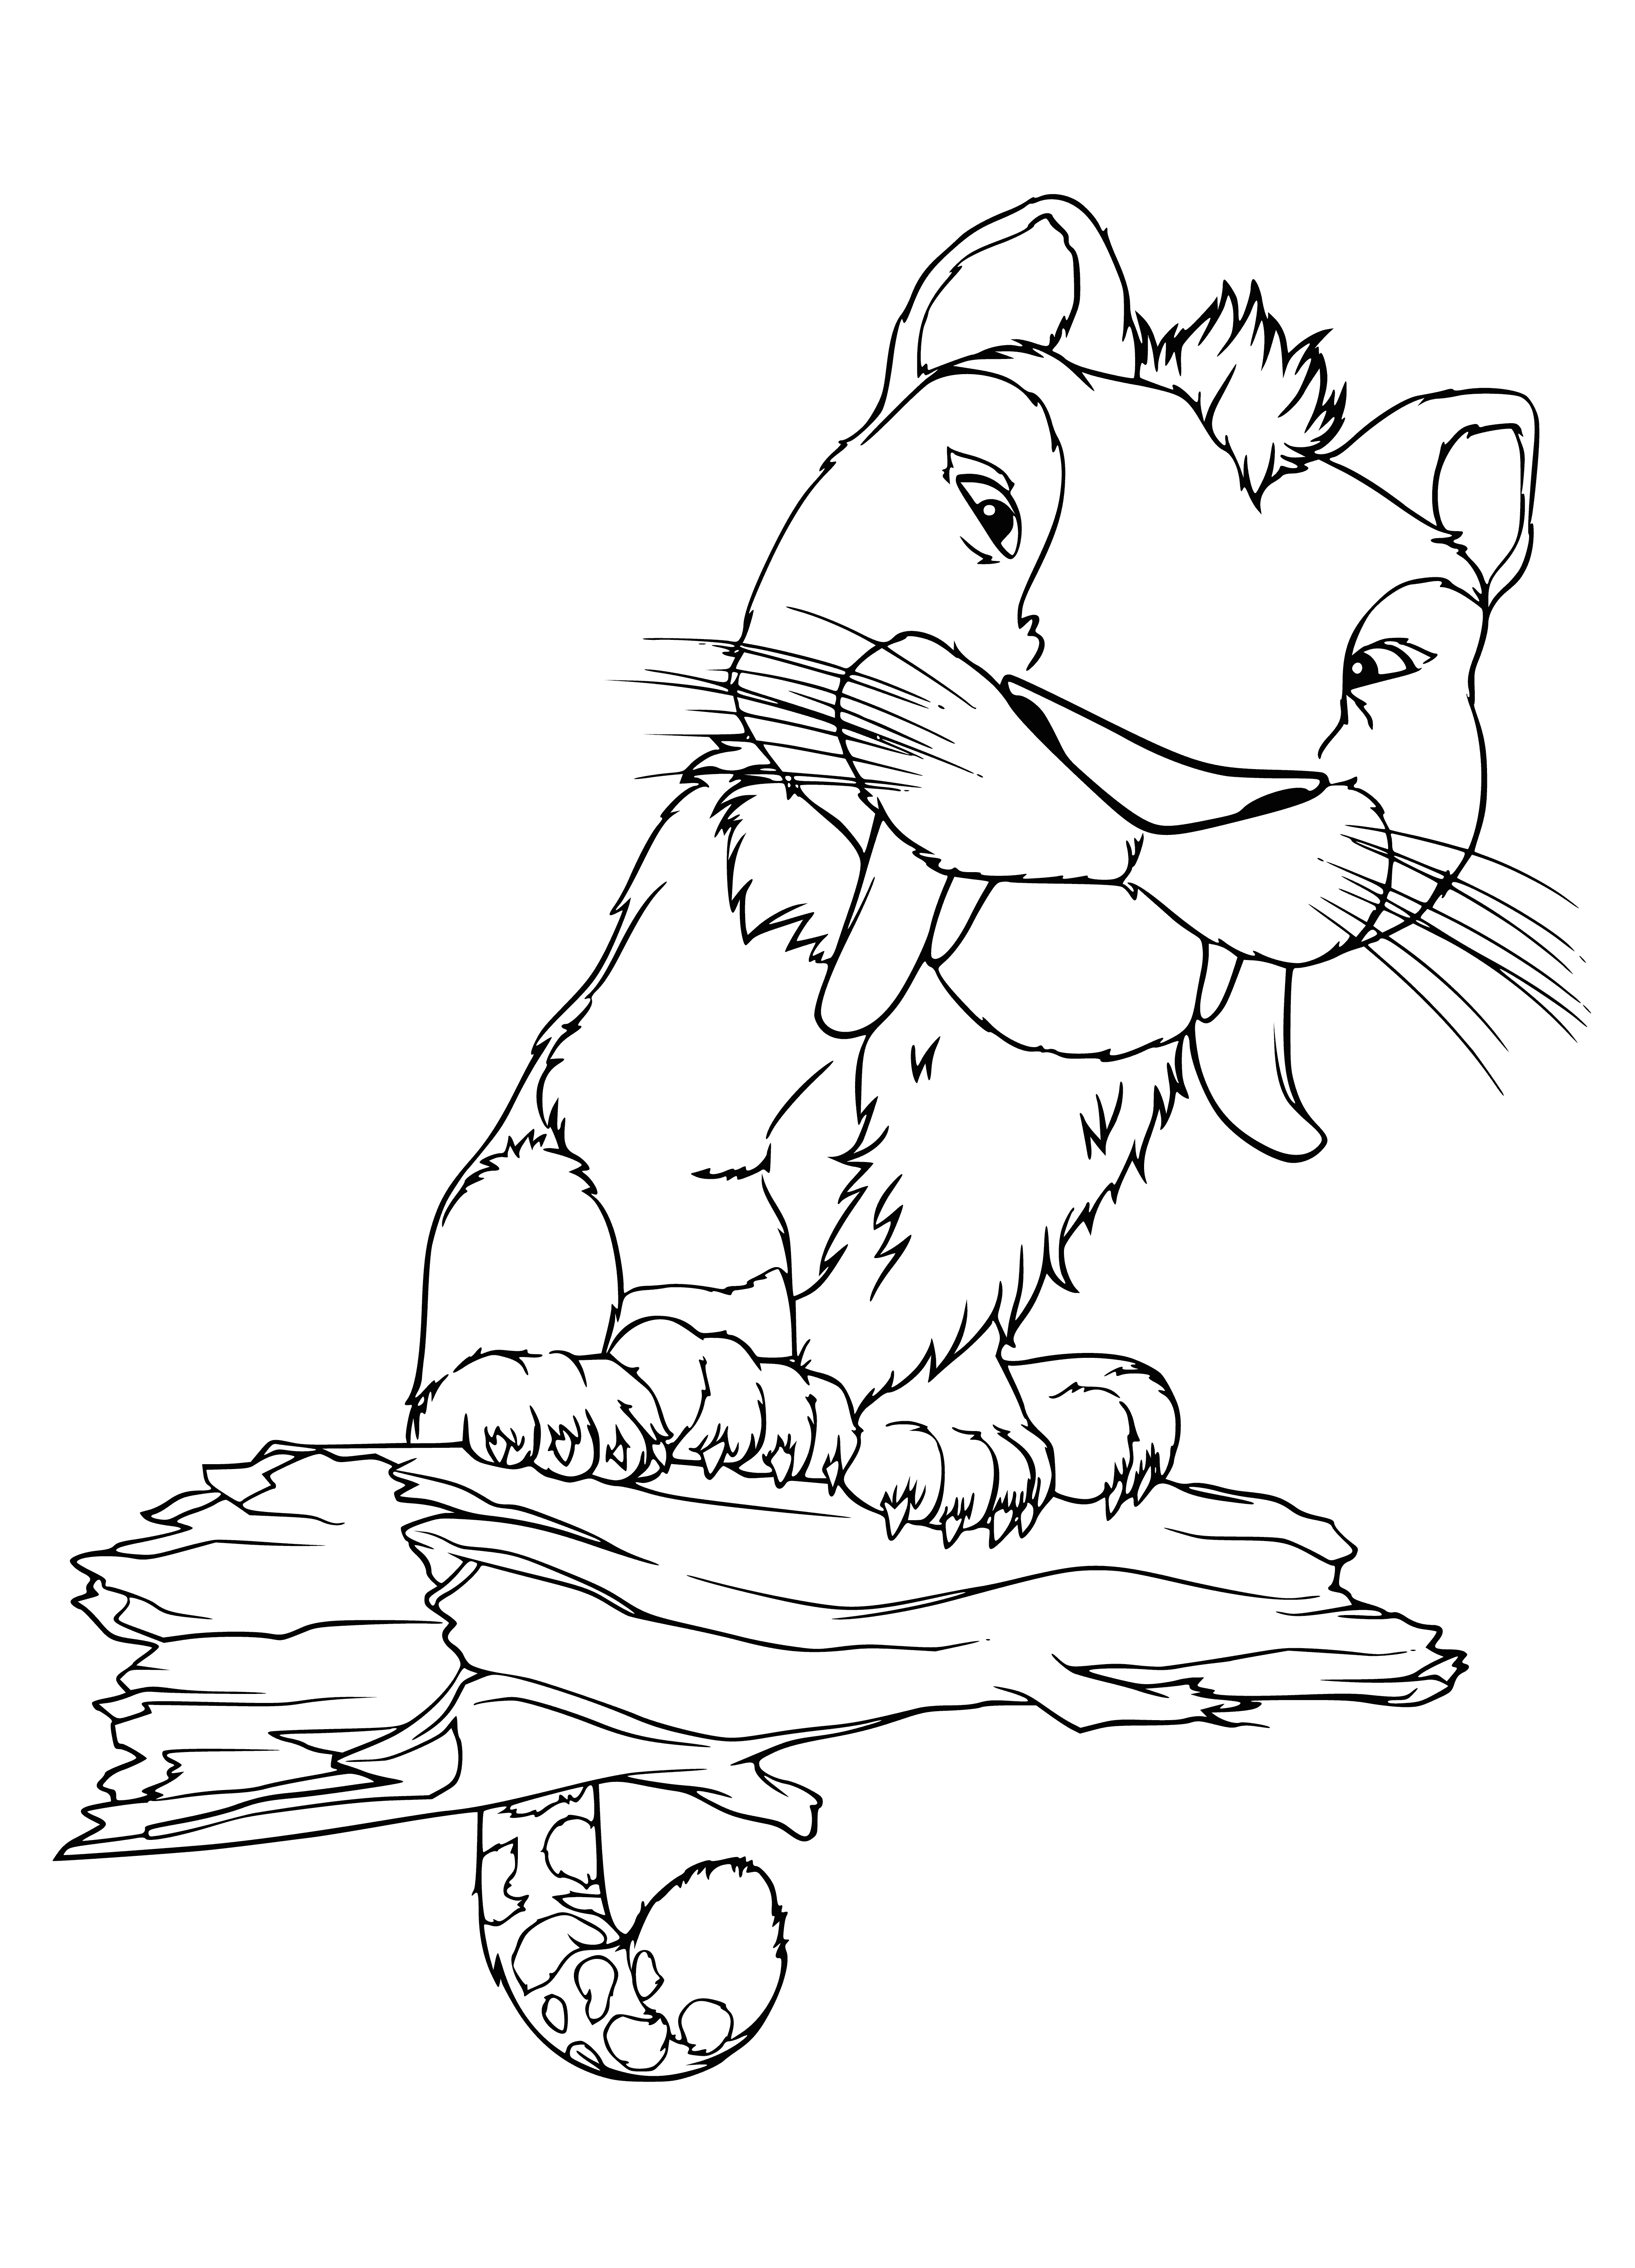 coloring page: Small green lizard-like creature with large eyes, perched on a rock next to a fire, featured in coloring page.